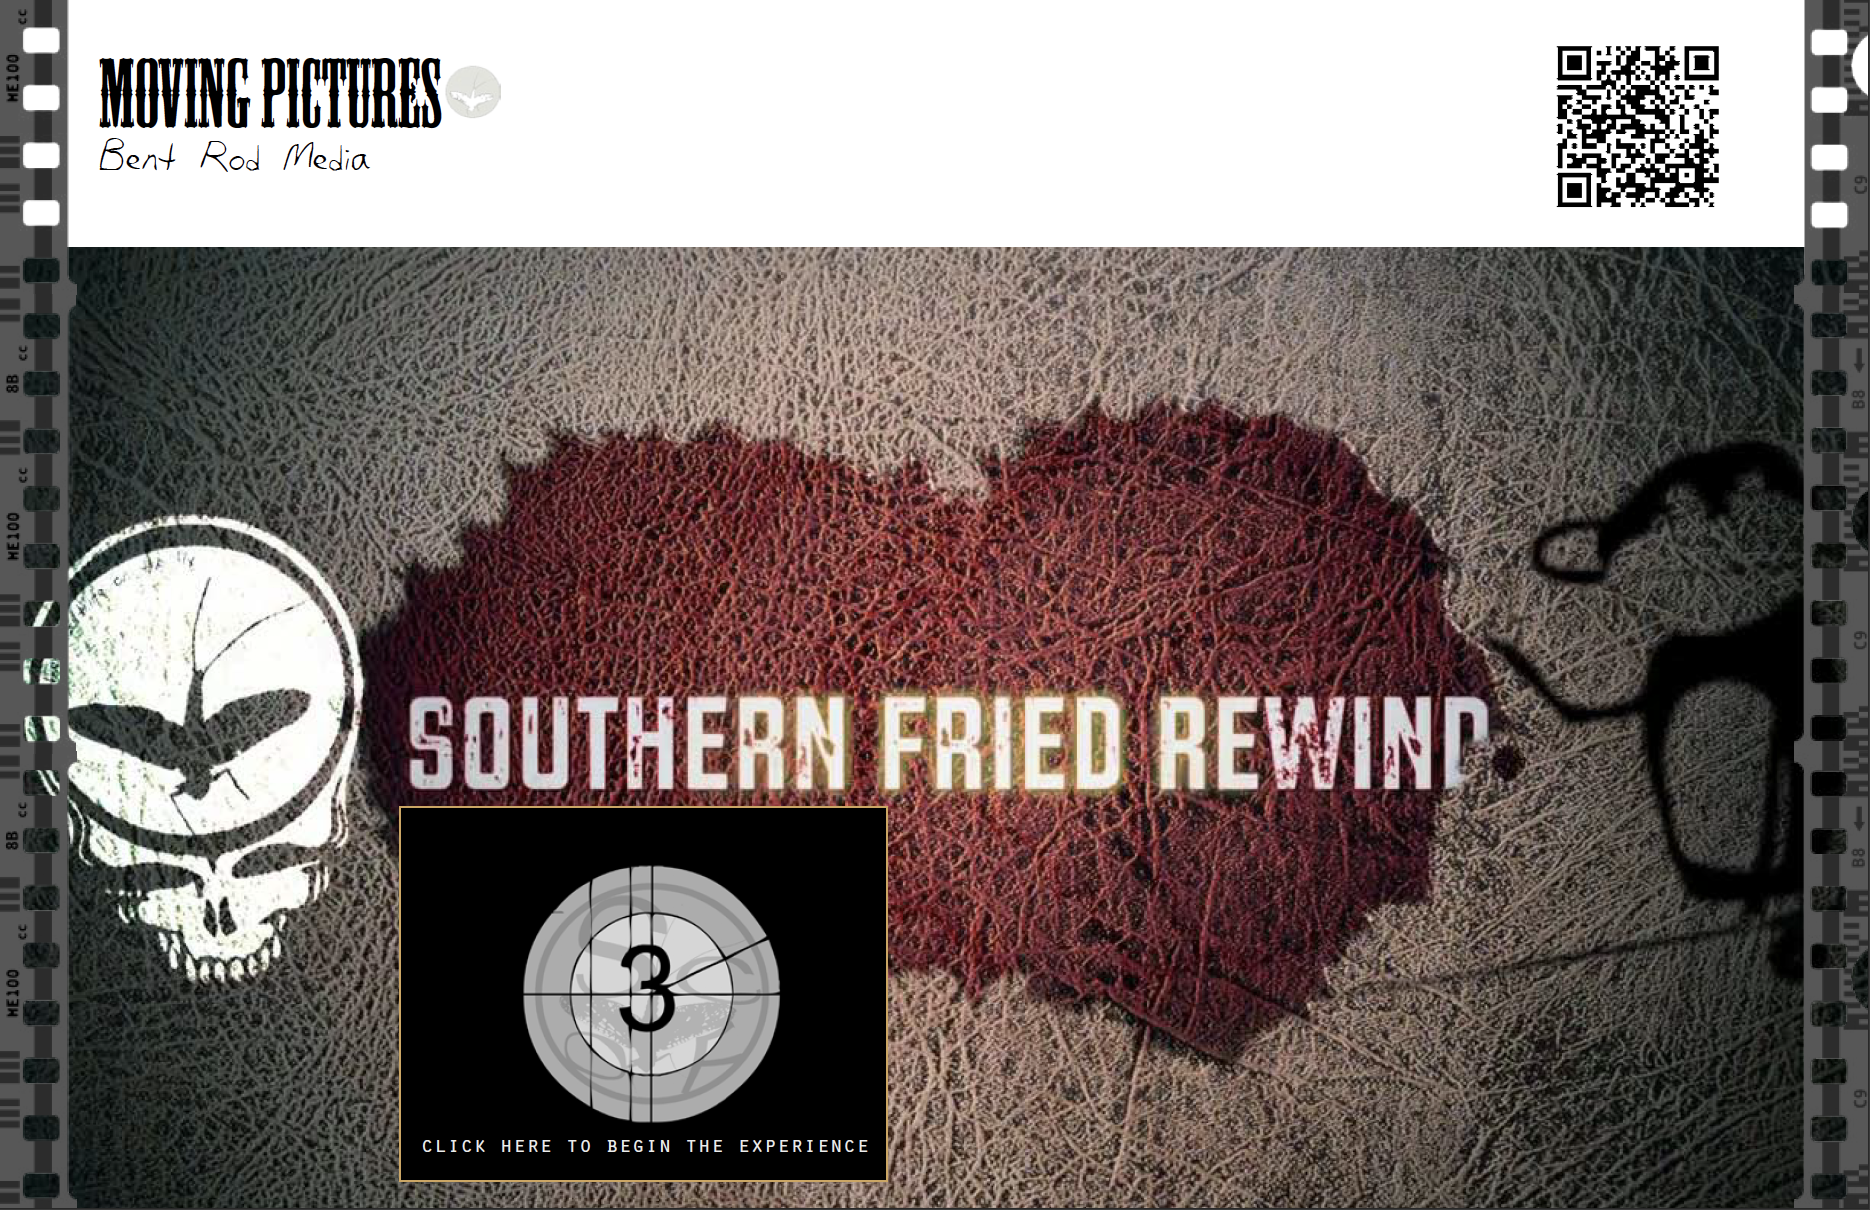 MOVING PICTURES: Southern Fried Rewind